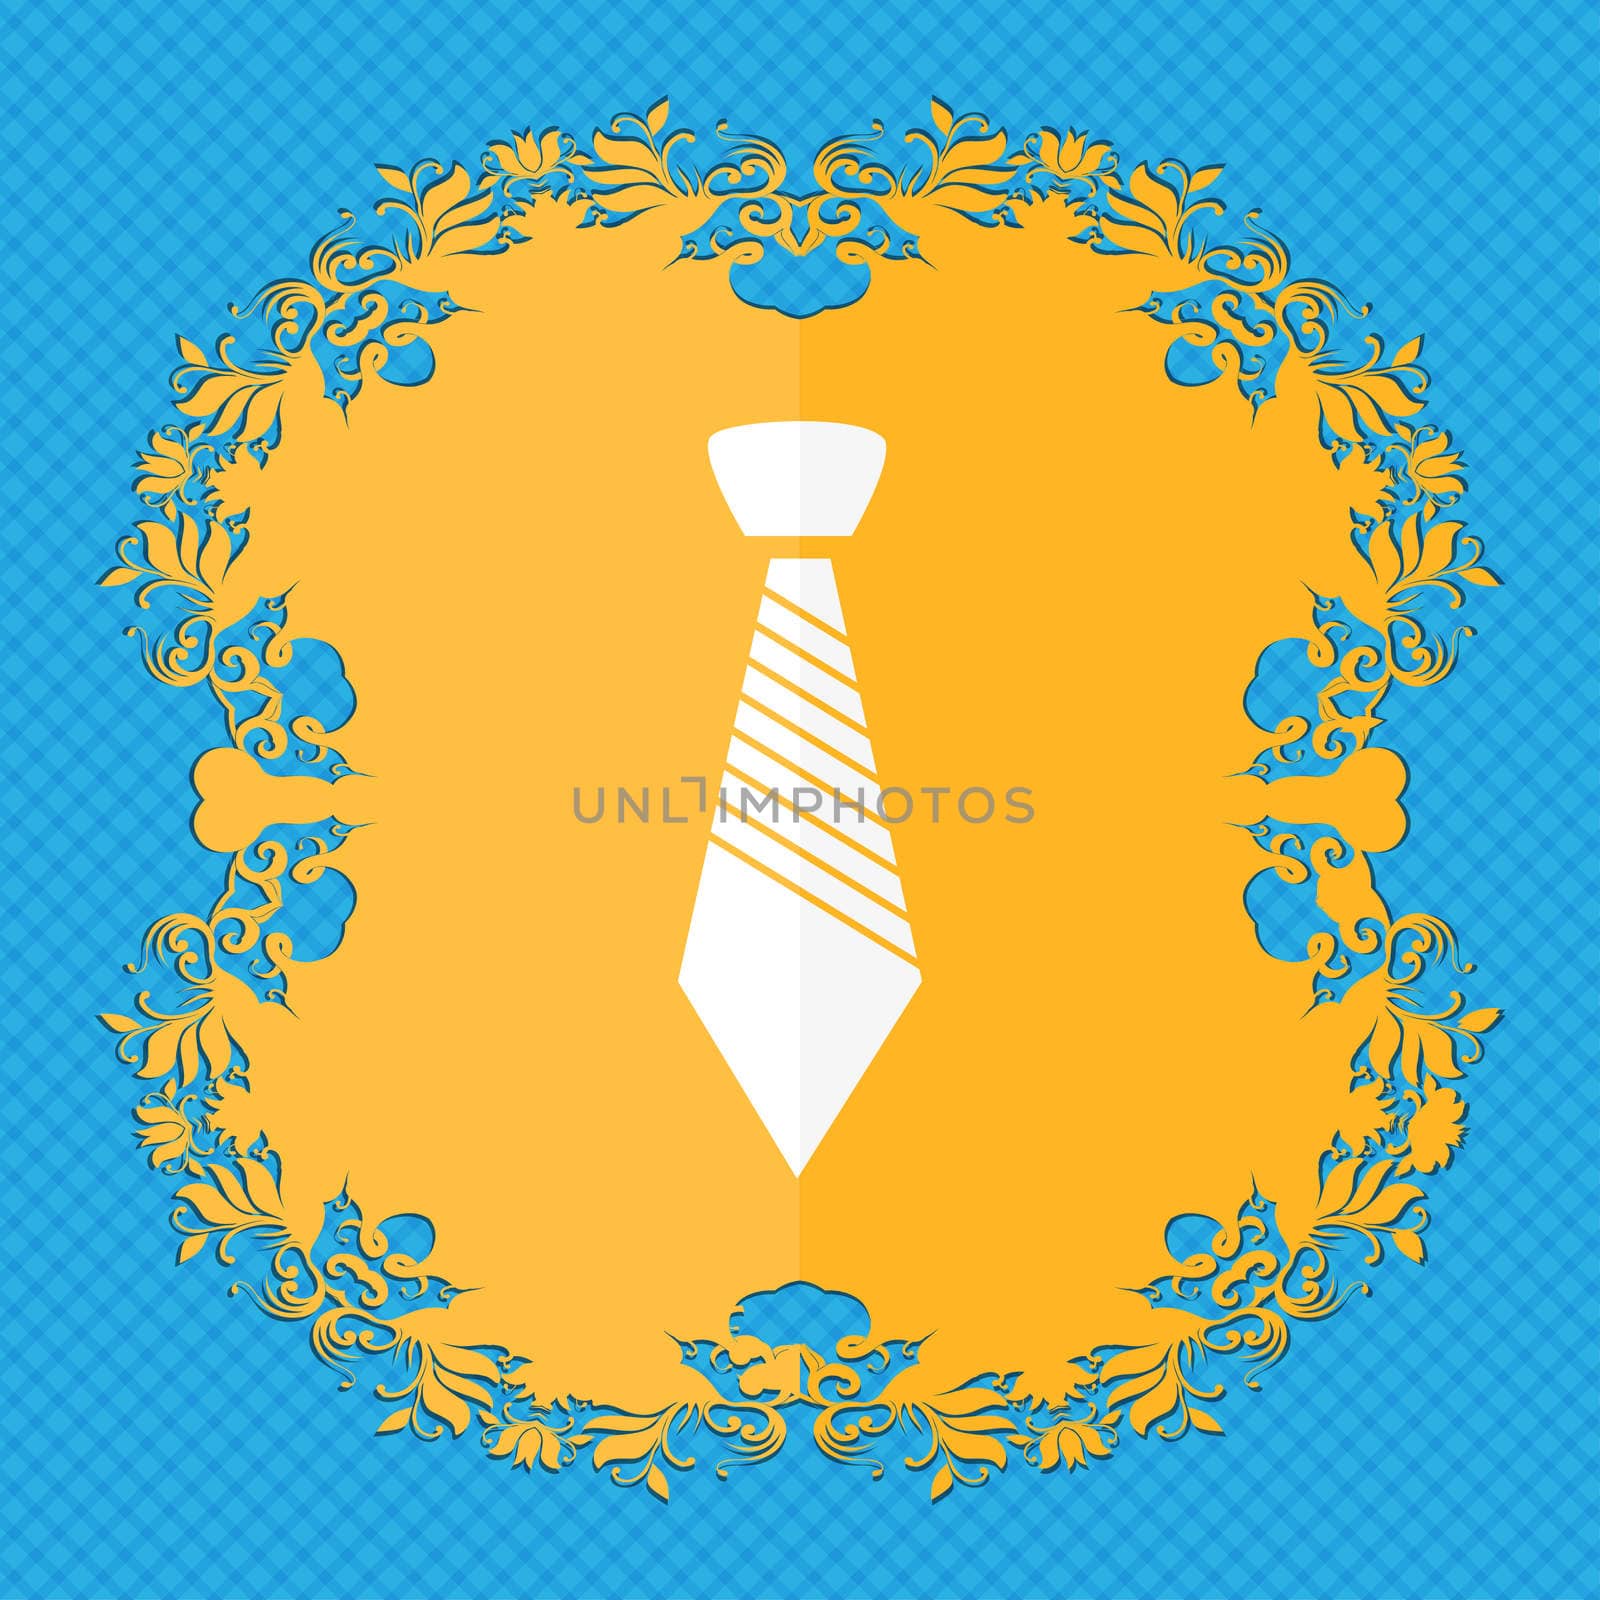 Tie sign icon. Business clothes symbol. Floral flat design on a blue abstract background with place for your text. illustration